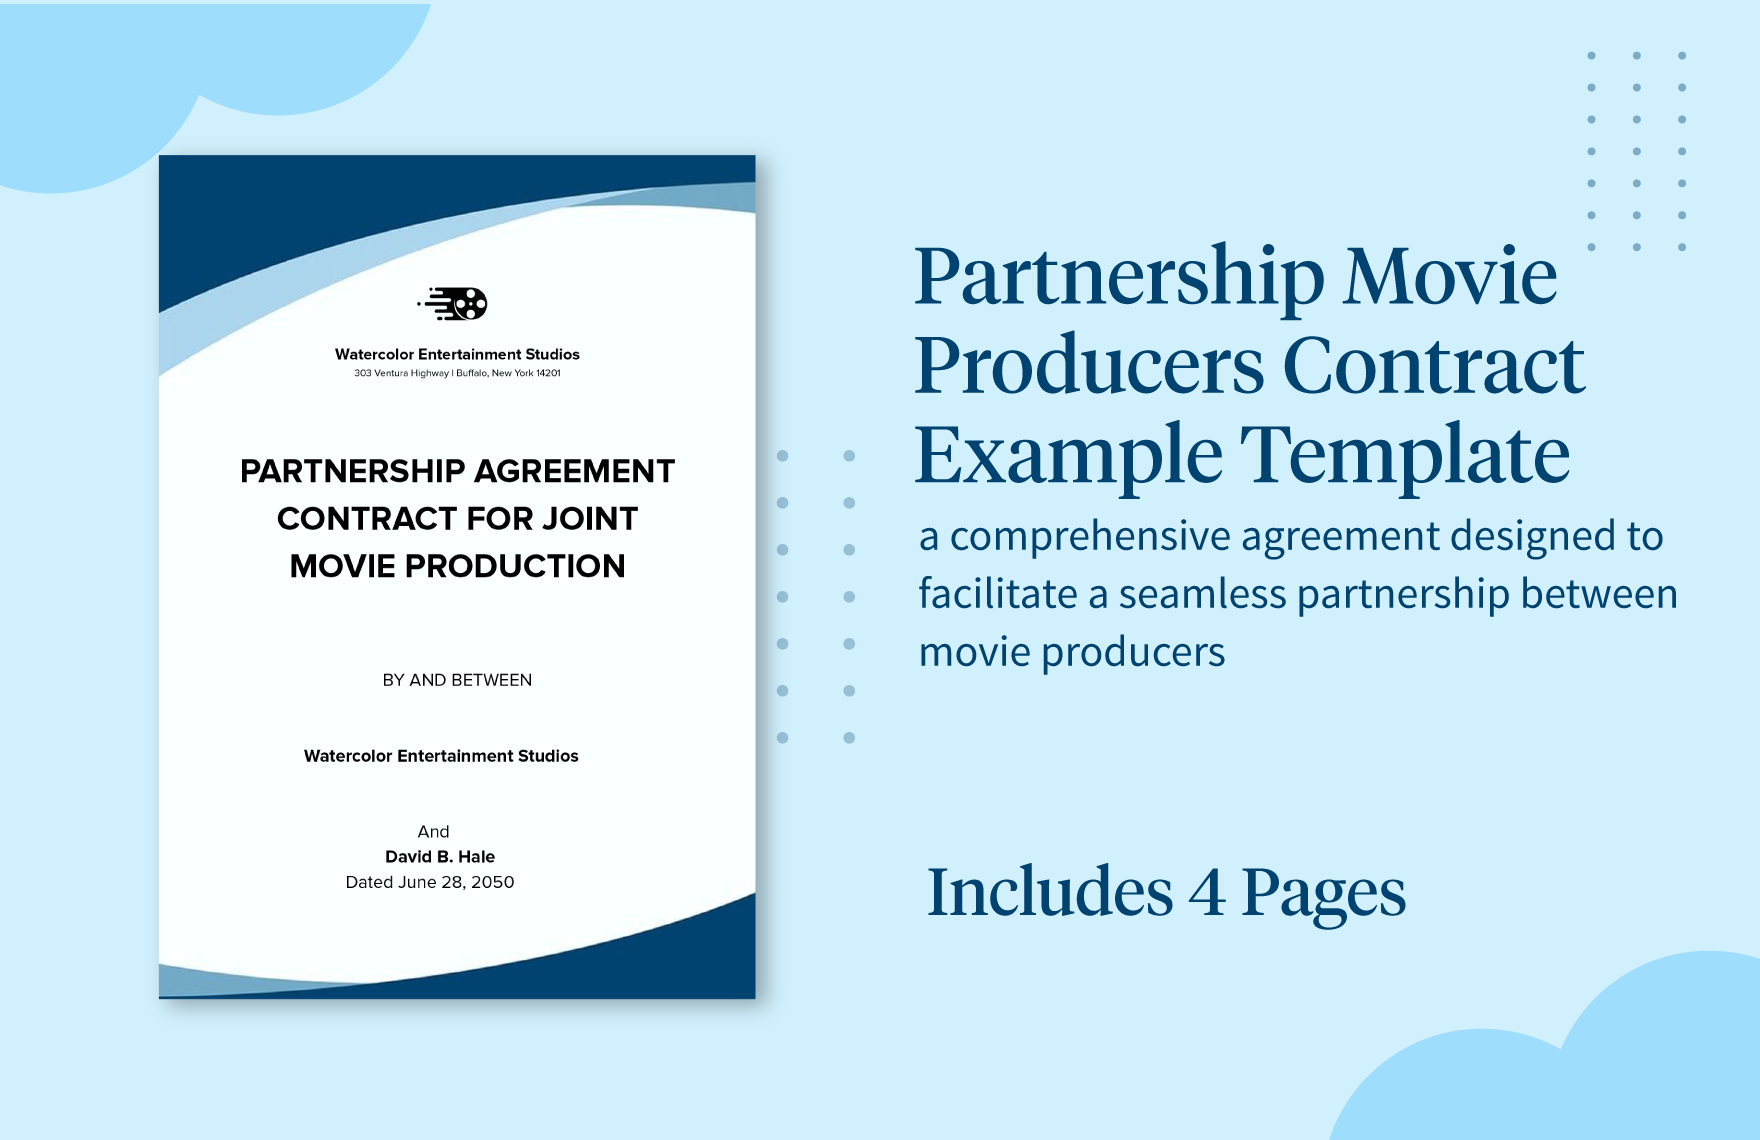 Partnership Movie Producers Contract Example Template